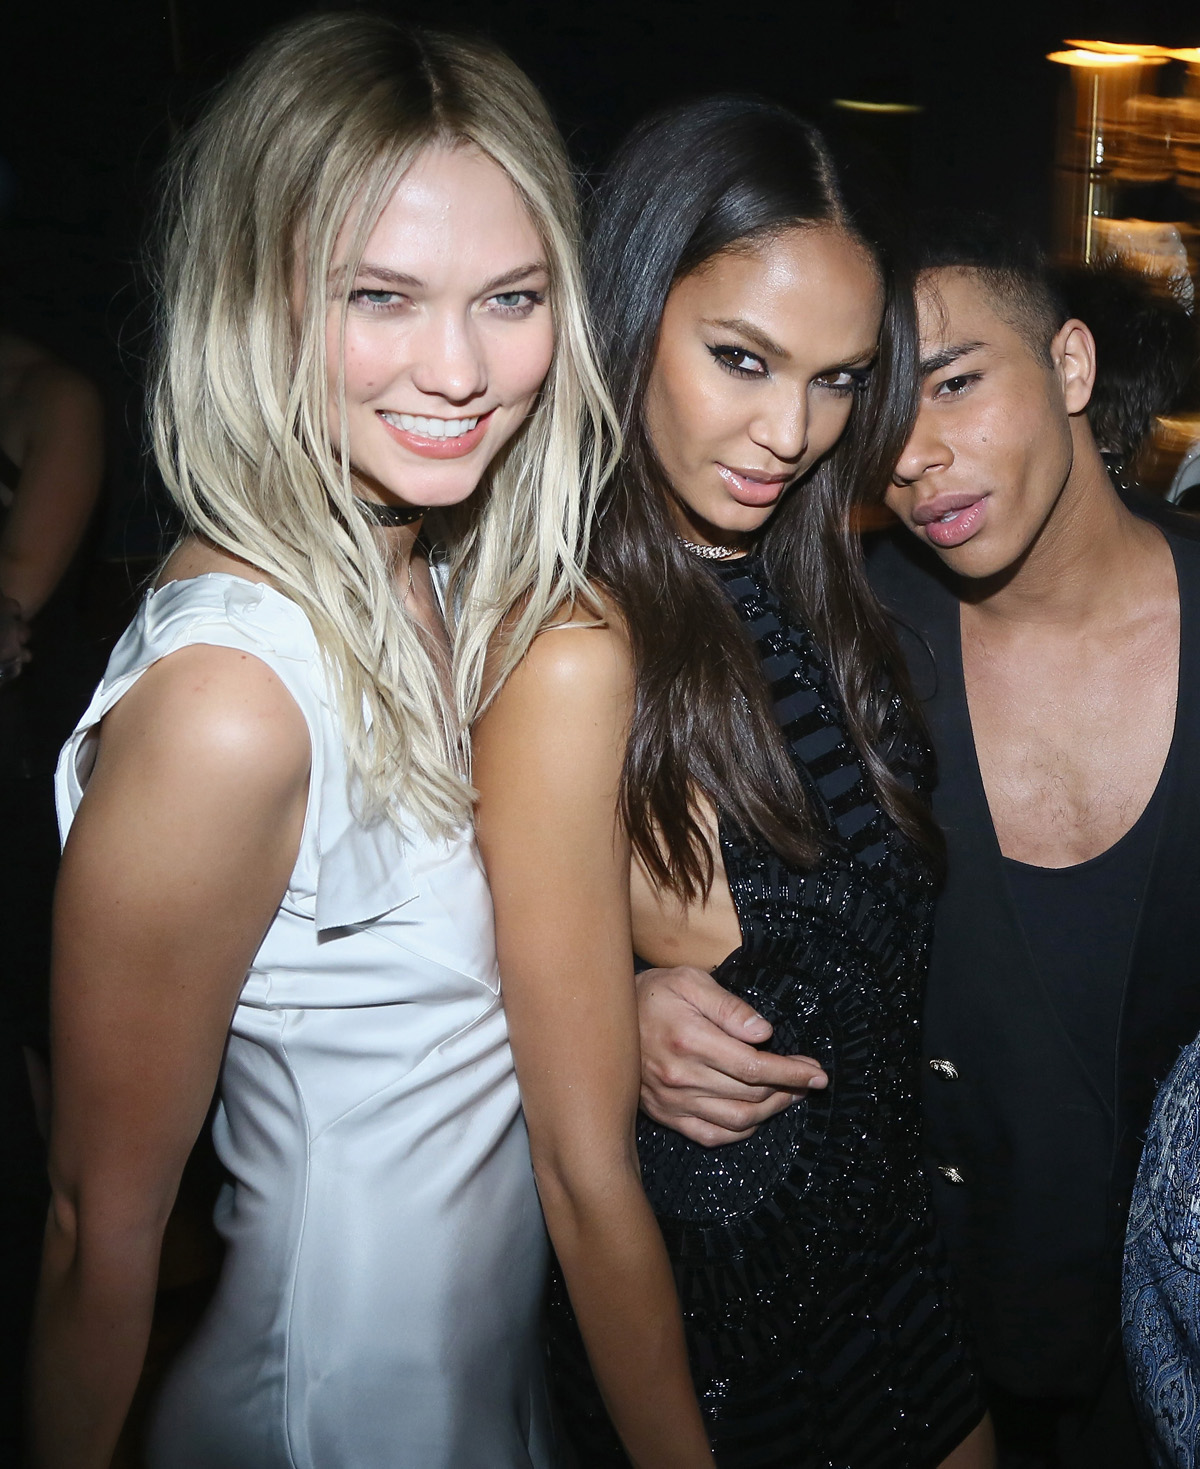 "PARIS, FRANCE - MARCH 03: Karlie Kloss, Joan Smalls and Olivier Rousteing attend the Balmain Aftershow Party as part of Paris Fashion Week Womenswear Automn/Winter 2016 at Restaurant Laperouse on March 3, 2016 in Paris, France. (Photo by Victor Boyko/WireImage)"